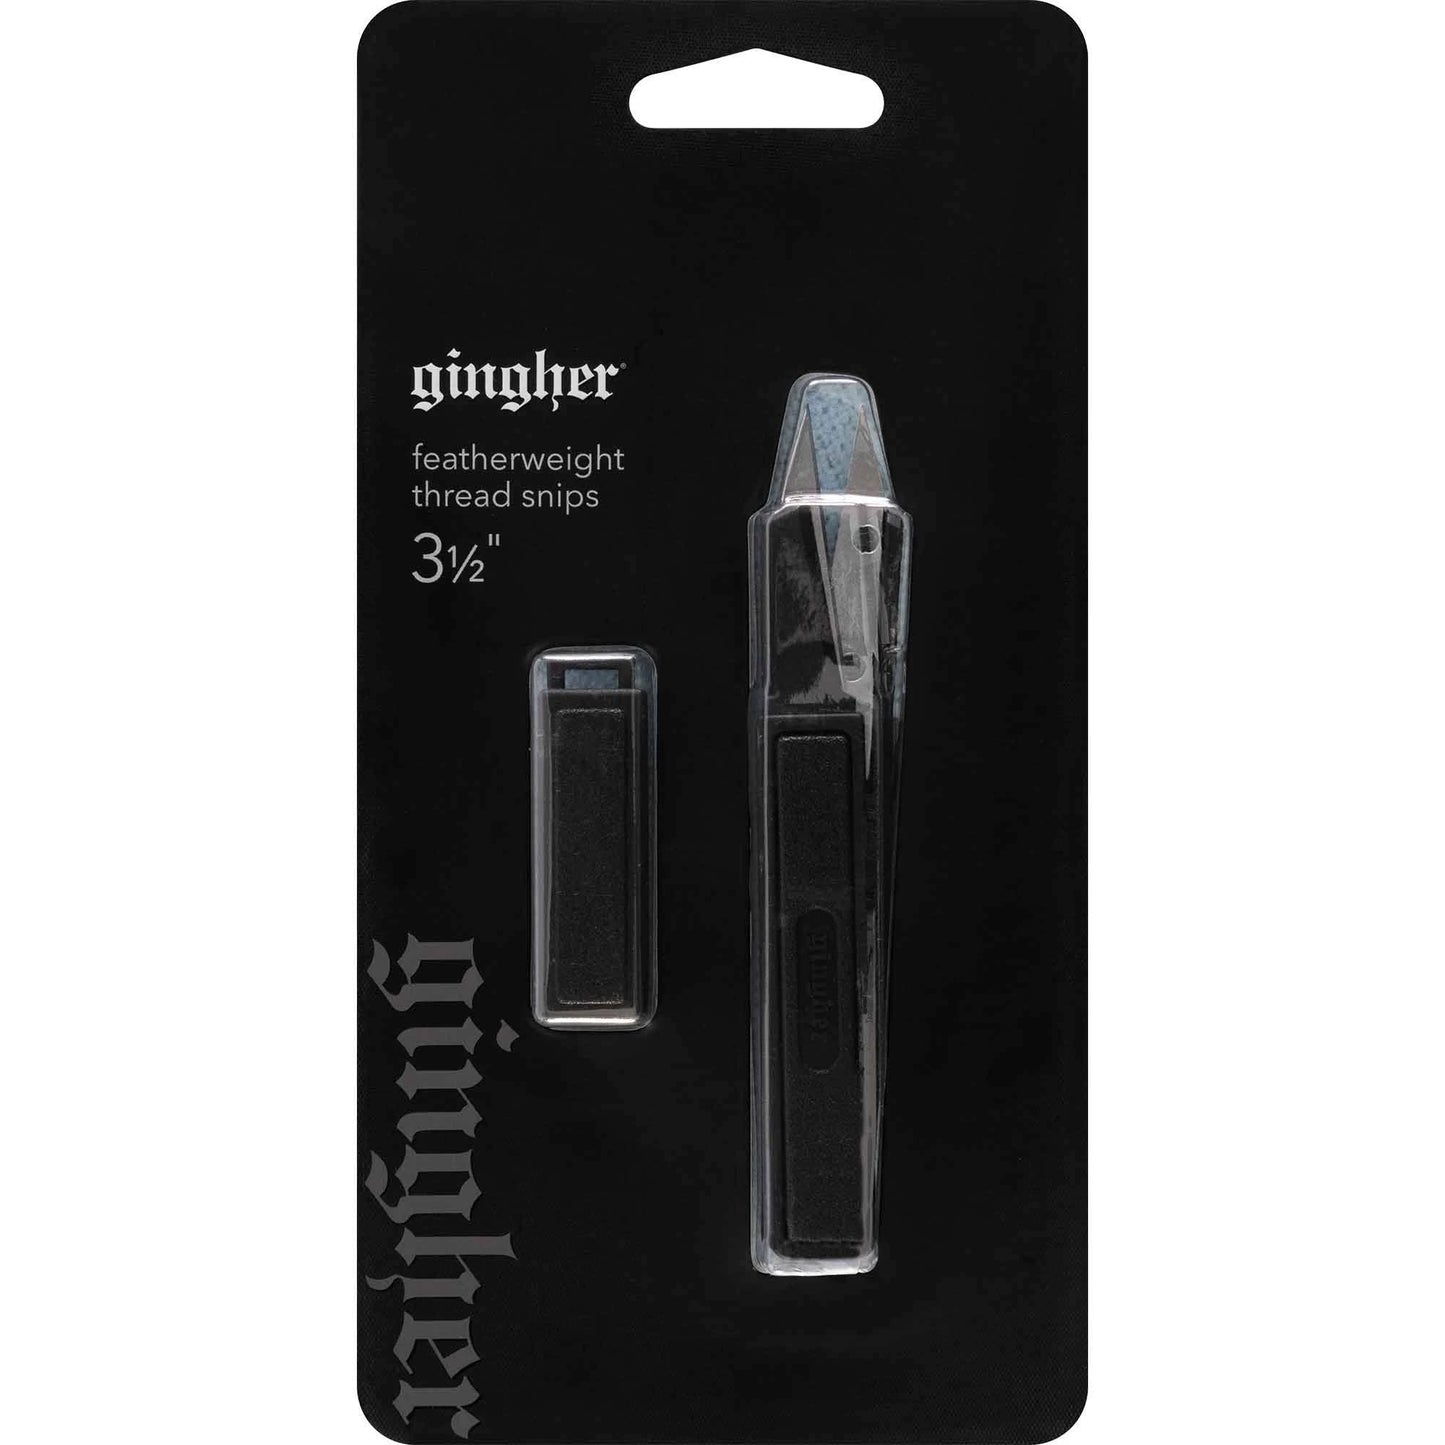 Gingher Featherweight Thread Nippers